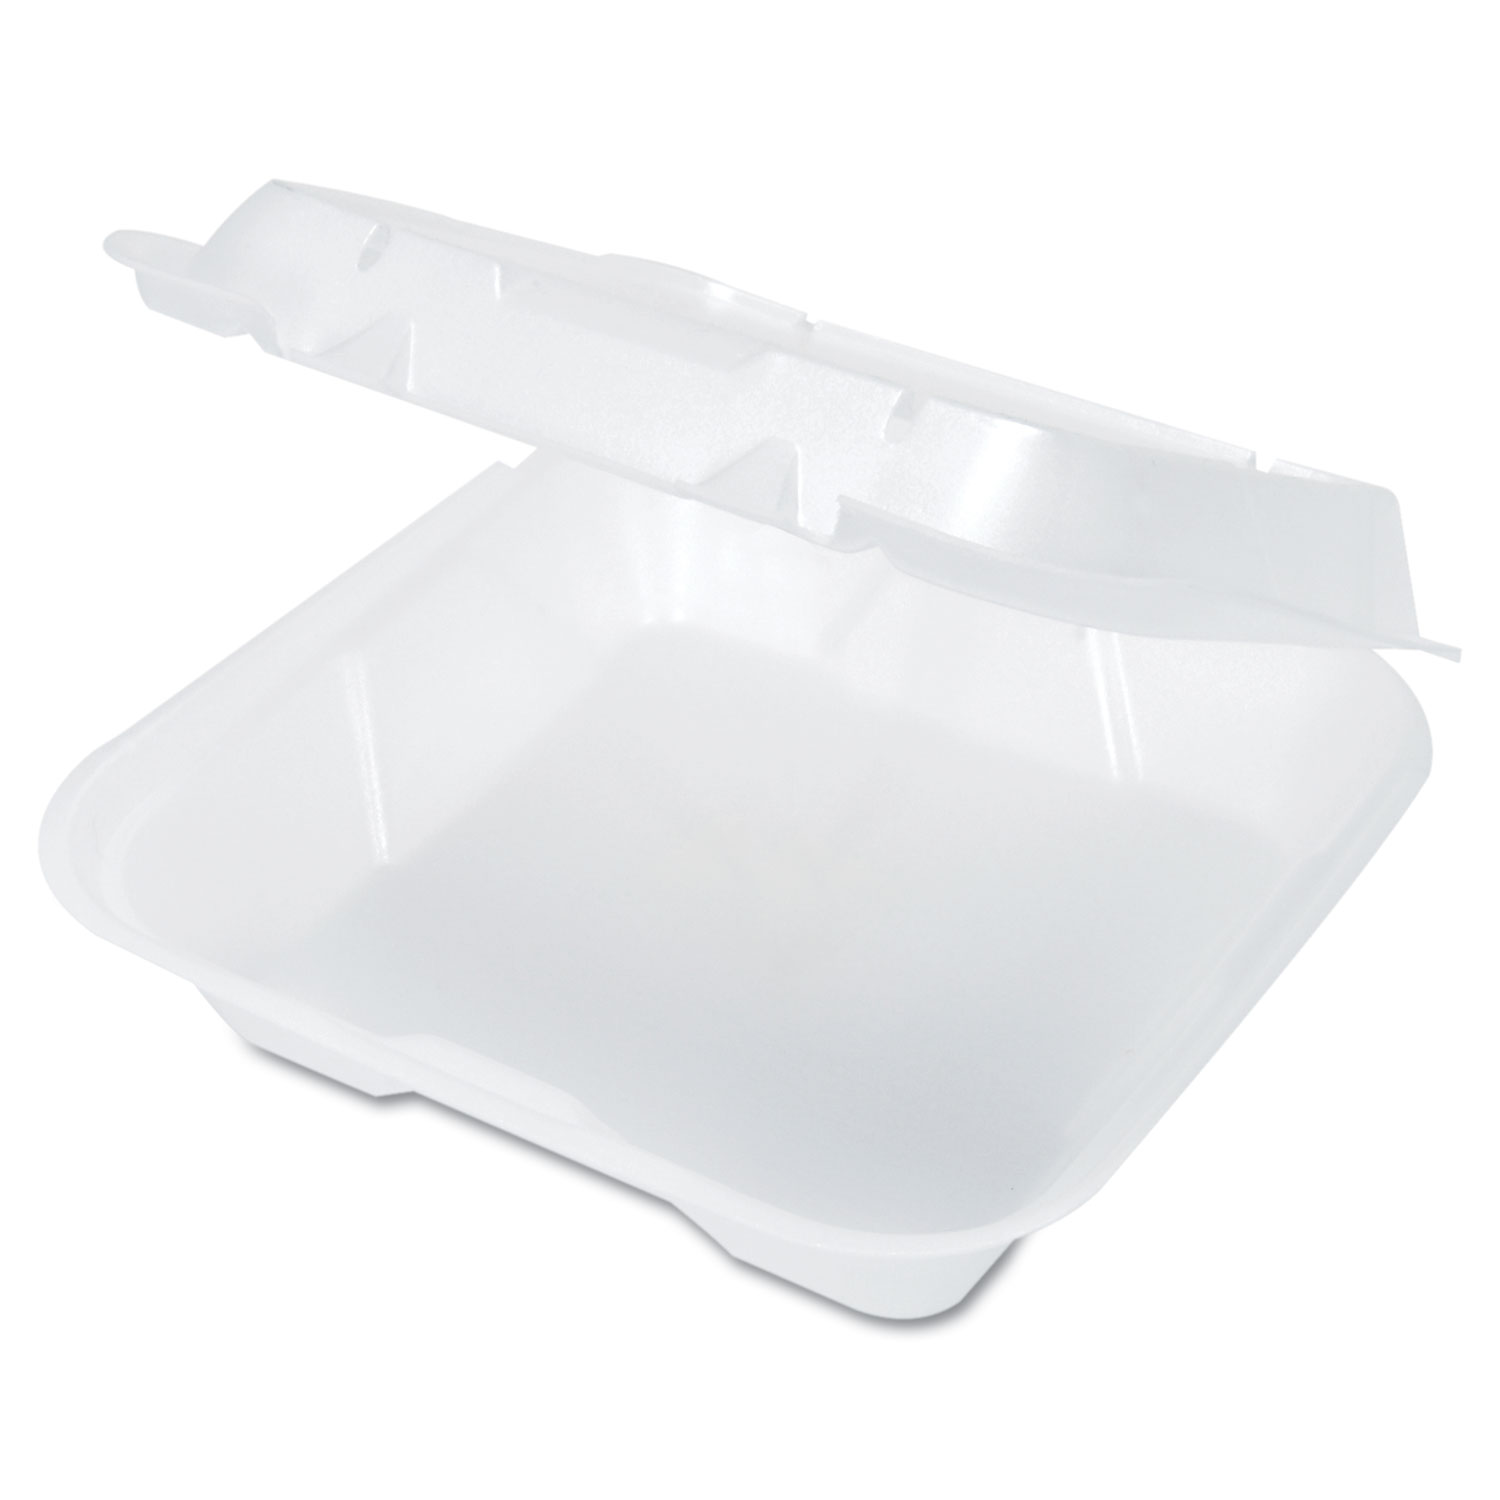  Genpak SN200-V-- Snap-It Vented Foam Hinged Container, White, 9-1/4 x 9-1/4 x 3, 100/Bag, 2/CT (GNPSN200V) 